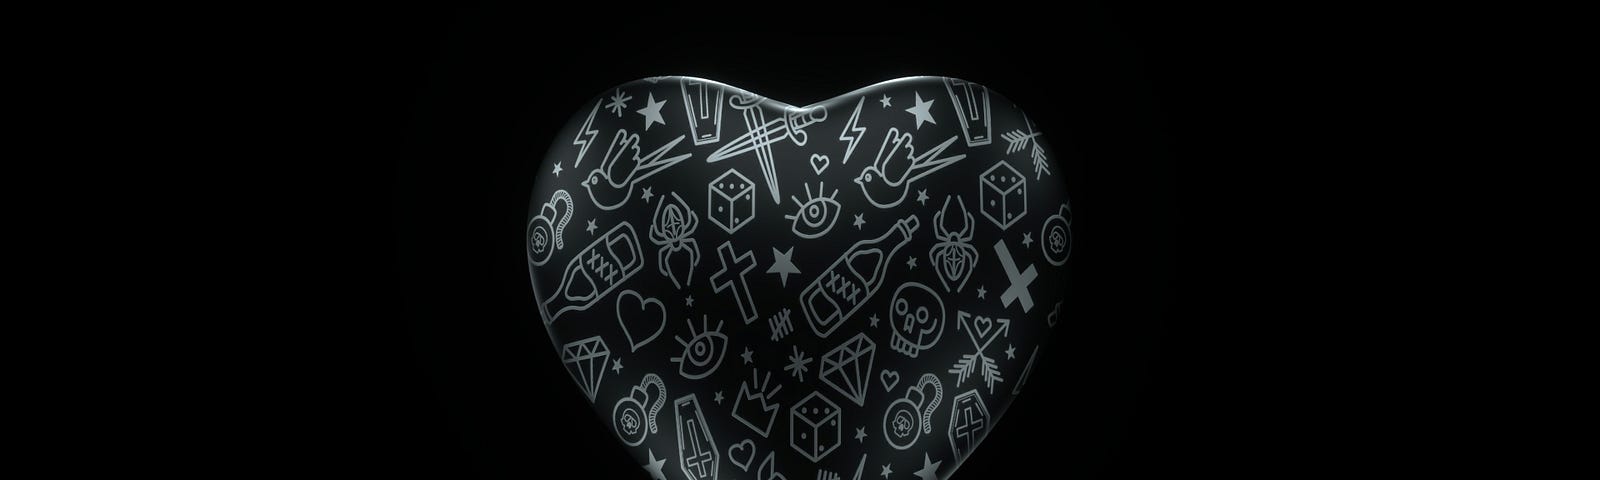 A dark heart with symbols carved in, on a black background.